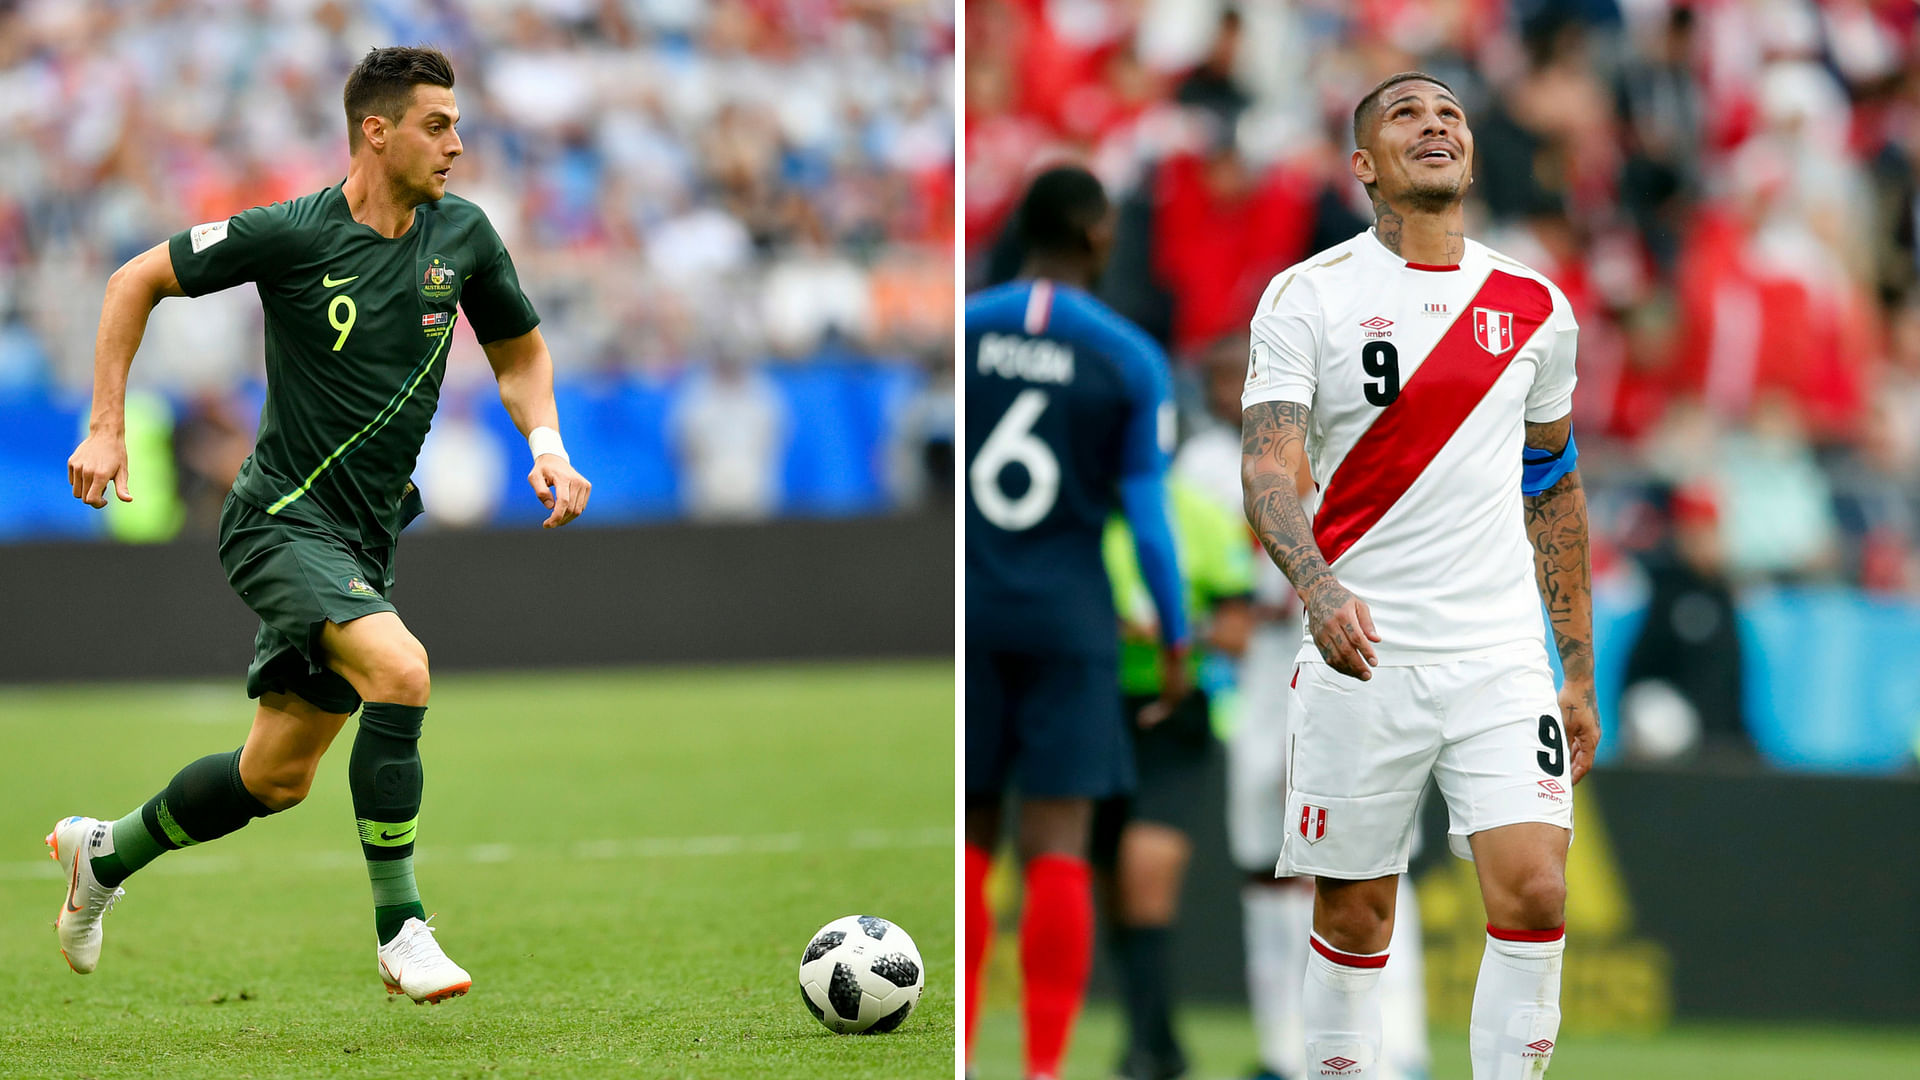 Australia’s Juric (left) will be looking to secure his country a knockout berth. Peru is already eliminated but captain Paulo Guerrero will want a win for the fans